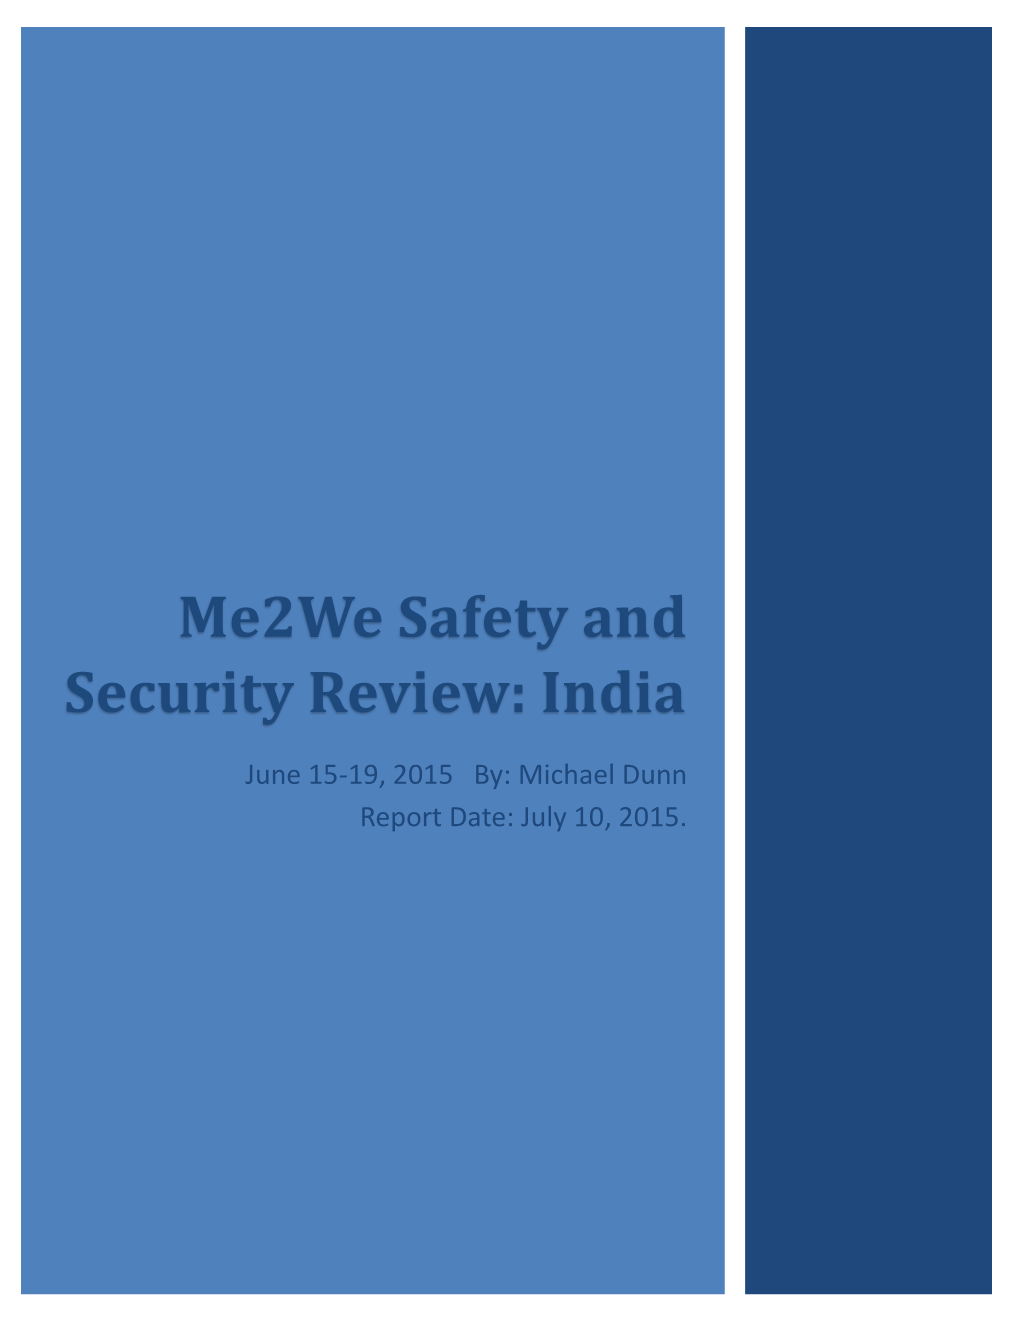 Me2we Safety and Security Review: India